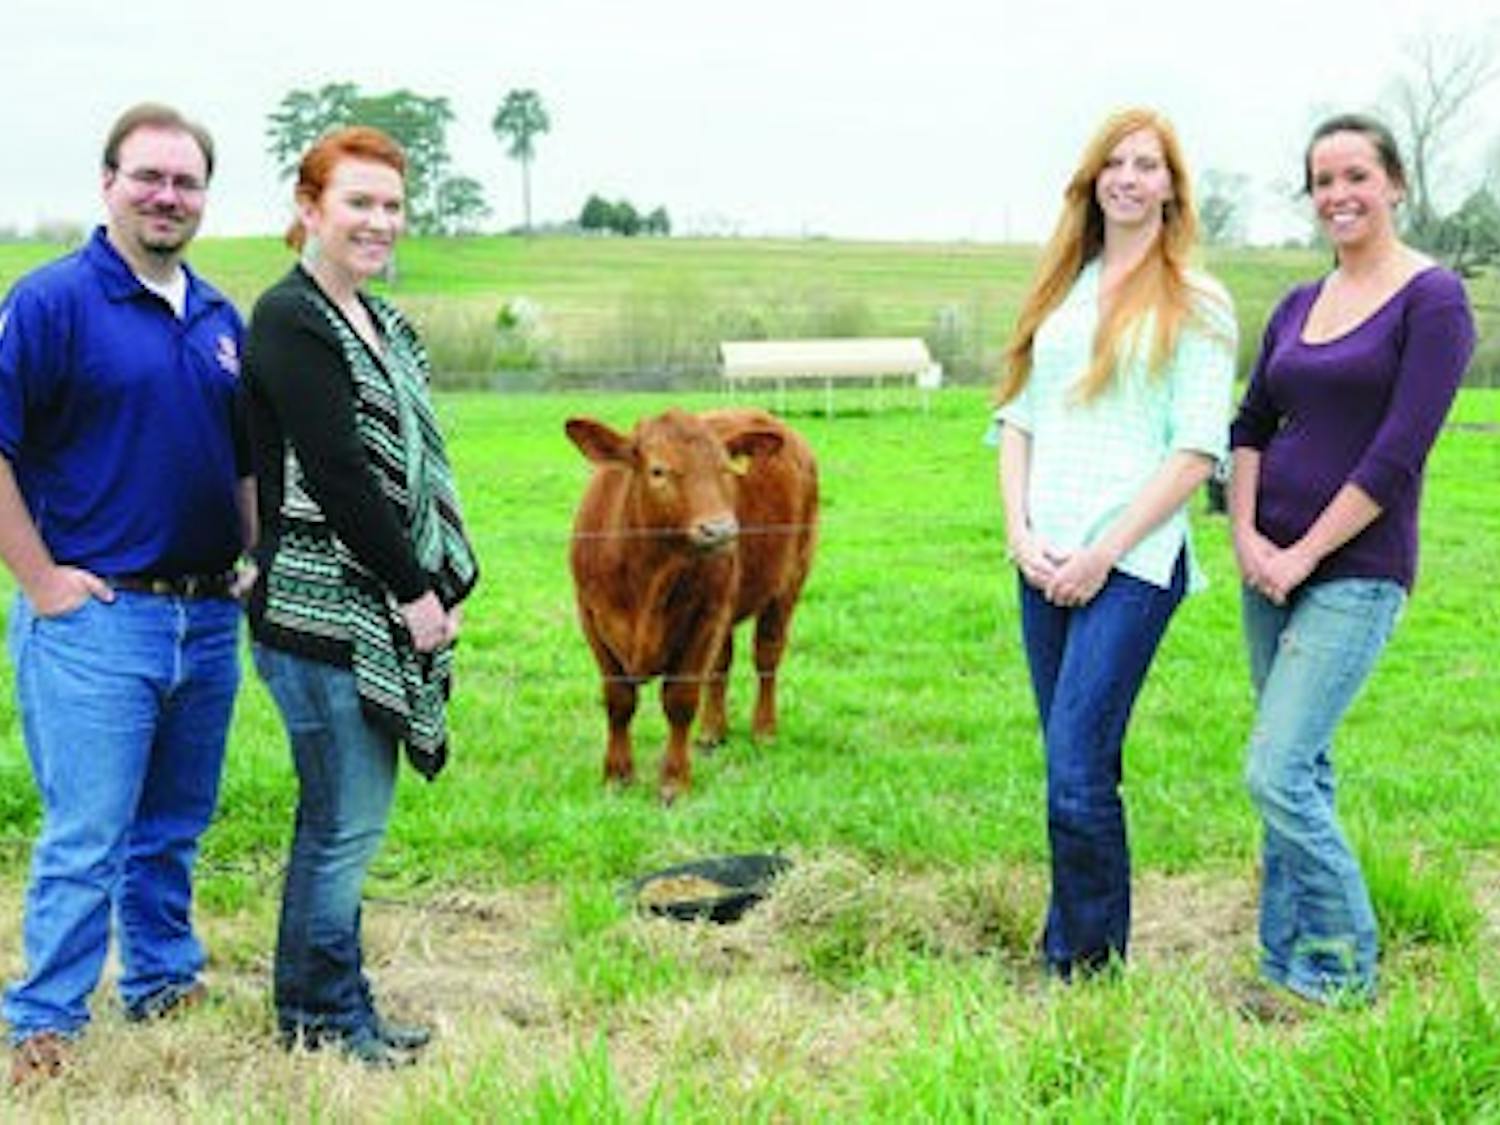 Brandon Smith, Reba Hicks, Casey Randle and Courteney McNamee stand with Cowboy, a 1-year-old steer from the research pastures. The four recently competed in the Animal Sciences Academic Quadrathlon. (Christen Harned / ASSISTANT PHOTO EDITOR)